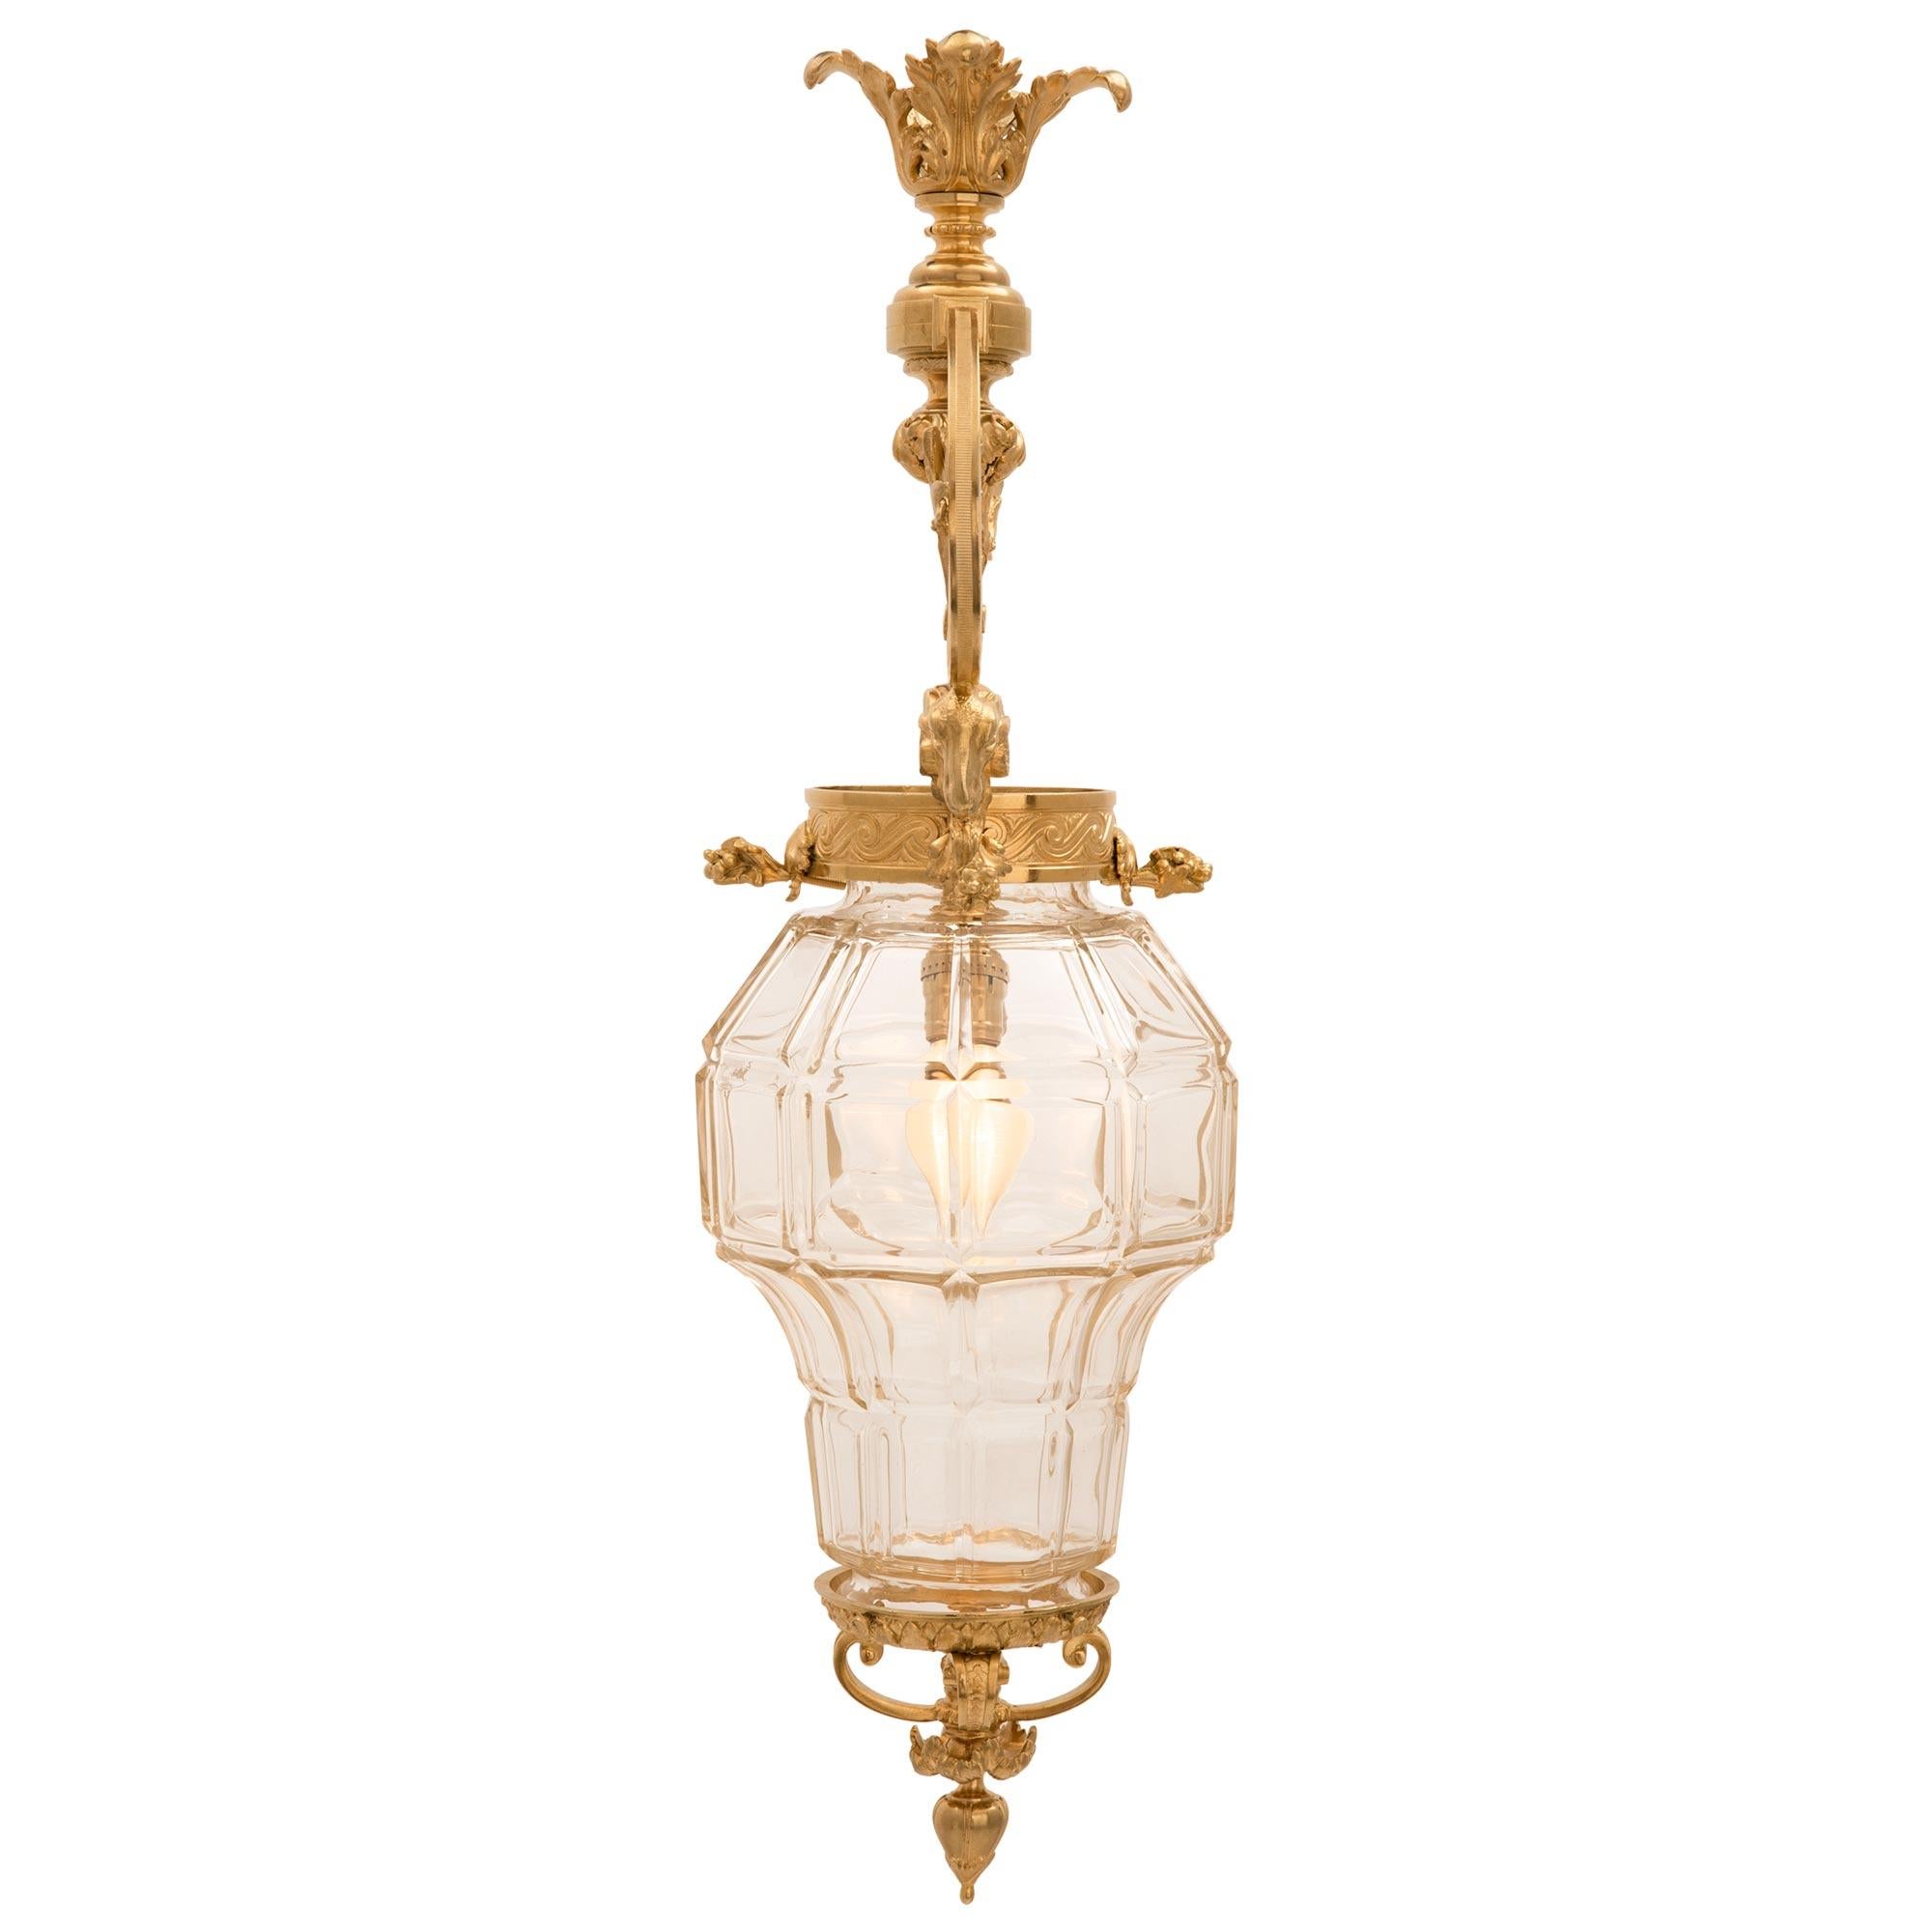 A charming French 19th century Louis XVI st. ormolu and glass lantern. The lantern is centered by an elegant bottom floral finial below lovely scrolled foliate designs. At the center is the beautiful cut glass body leading up to fine Vitruvian